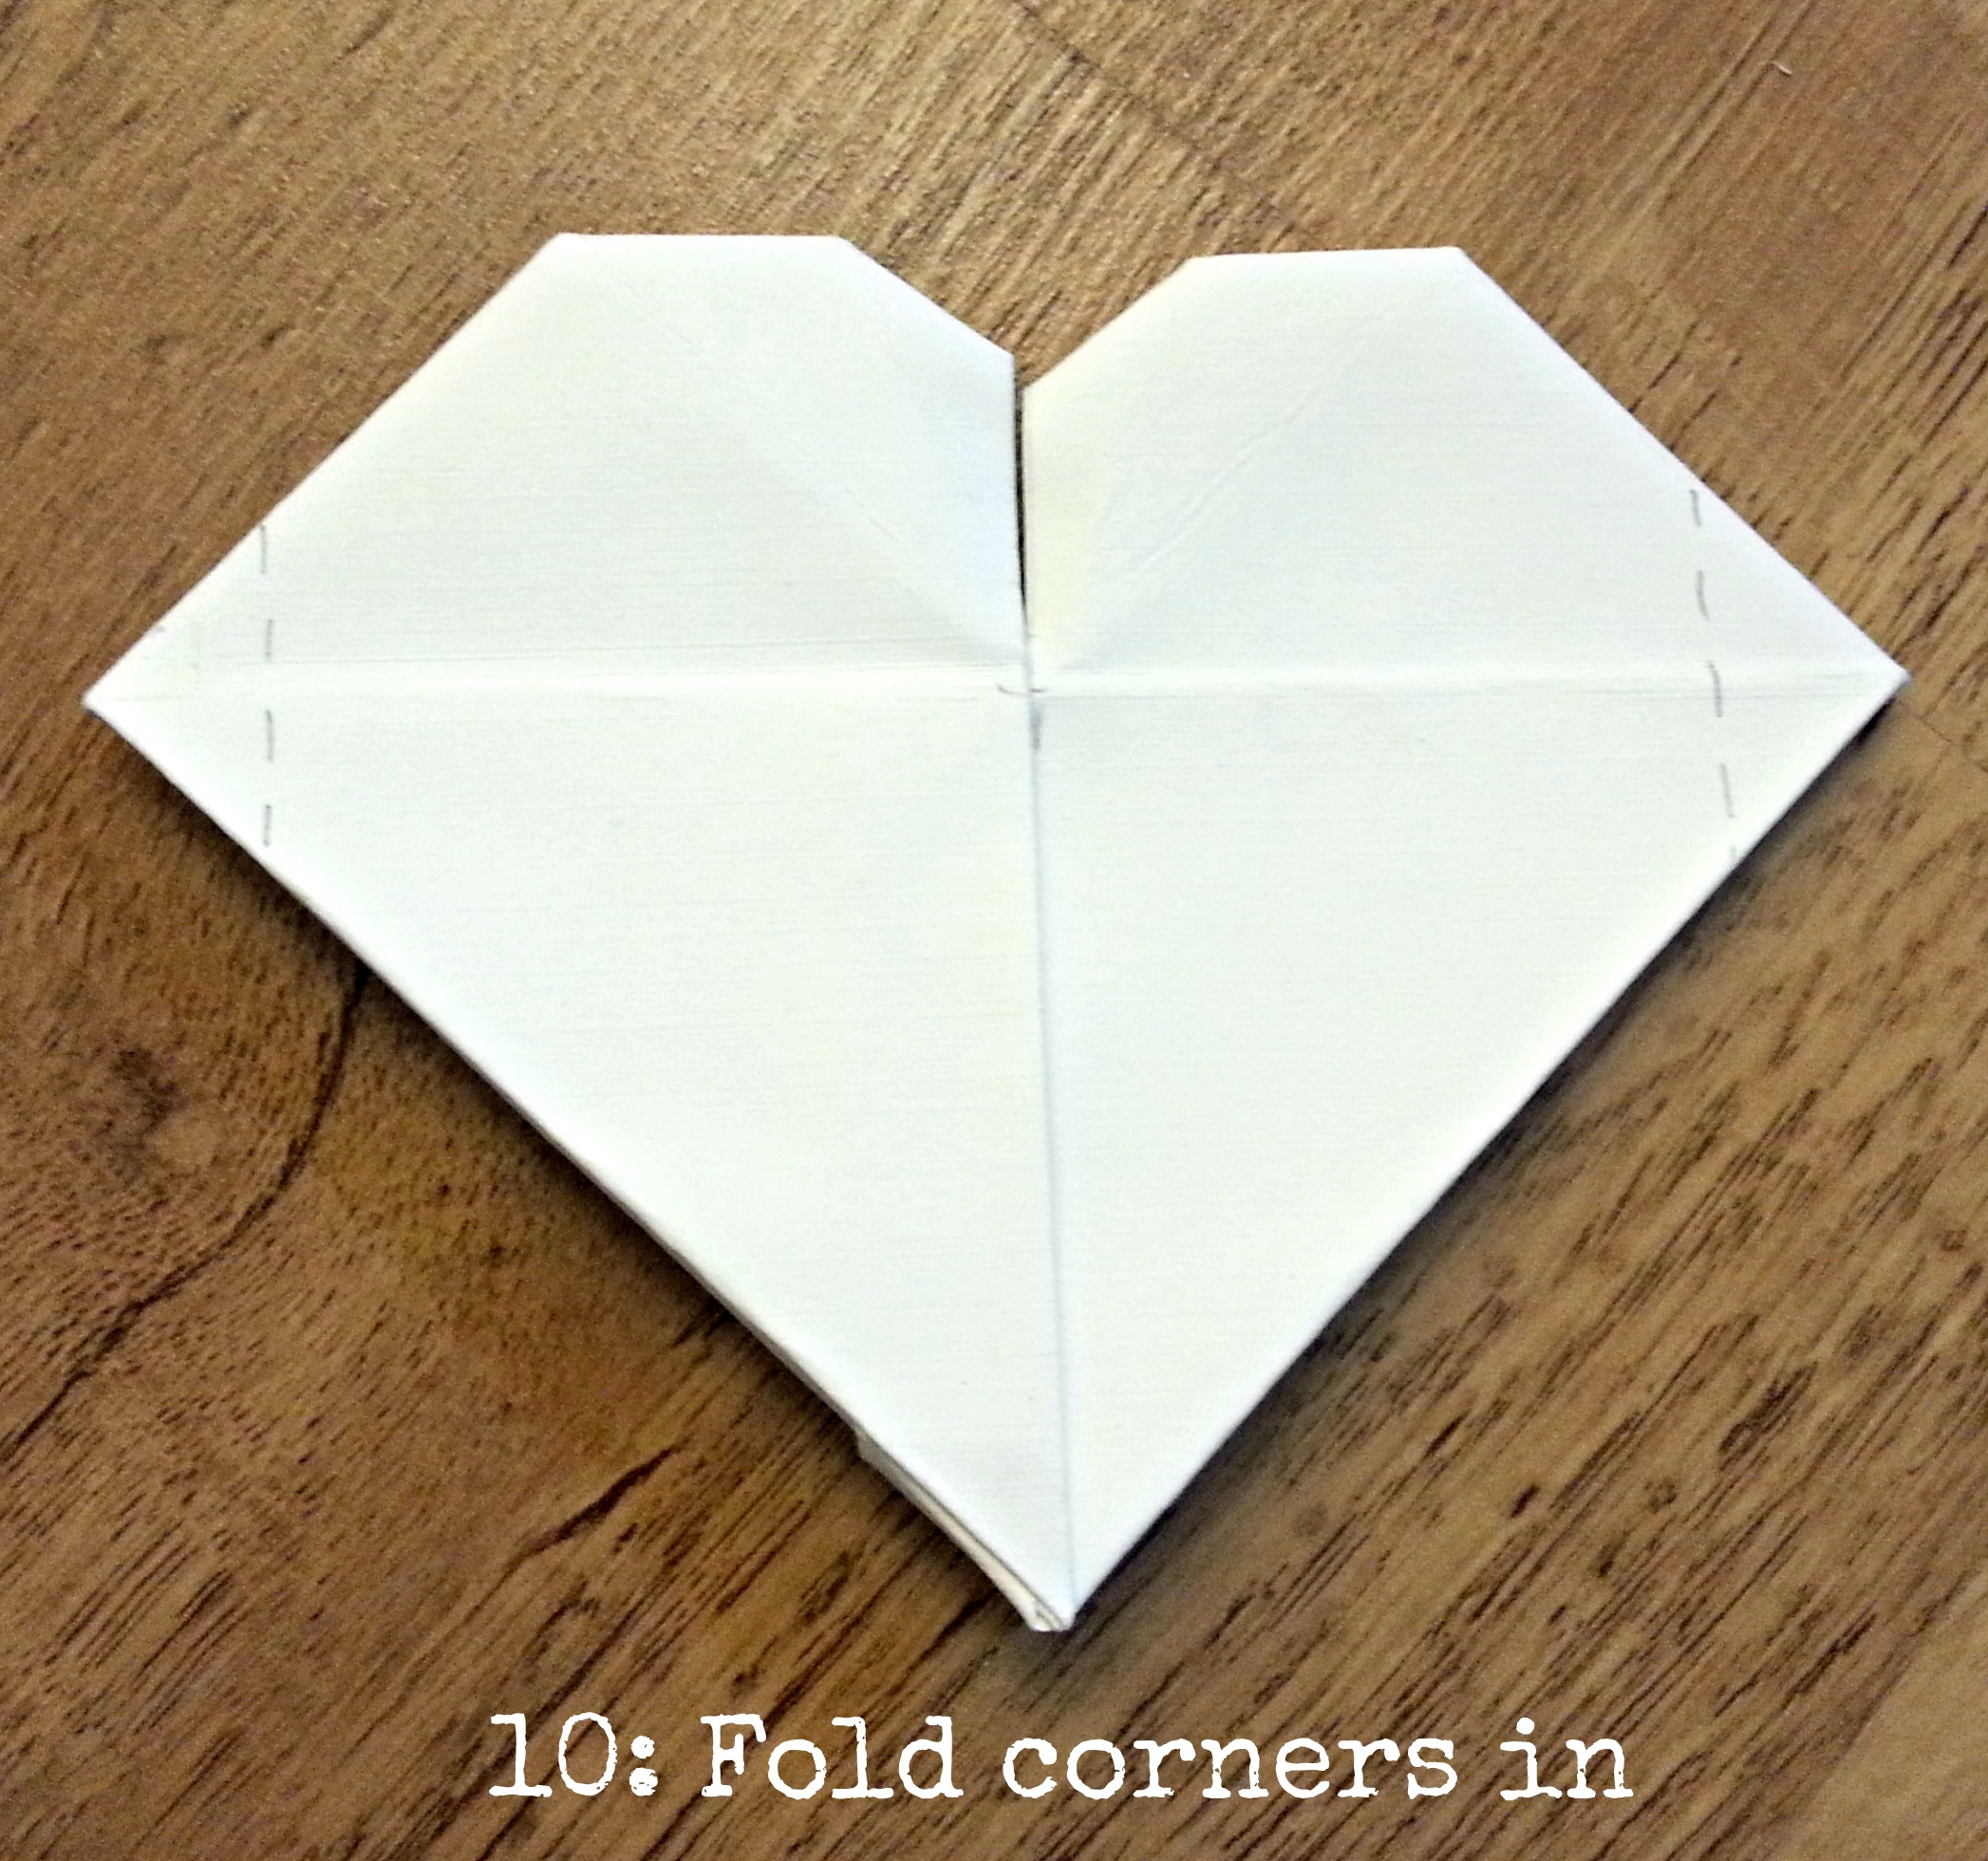 How To Make Small Origami Hearts Wedding Diy Tutorial Origami Heart Decorations Place Cards